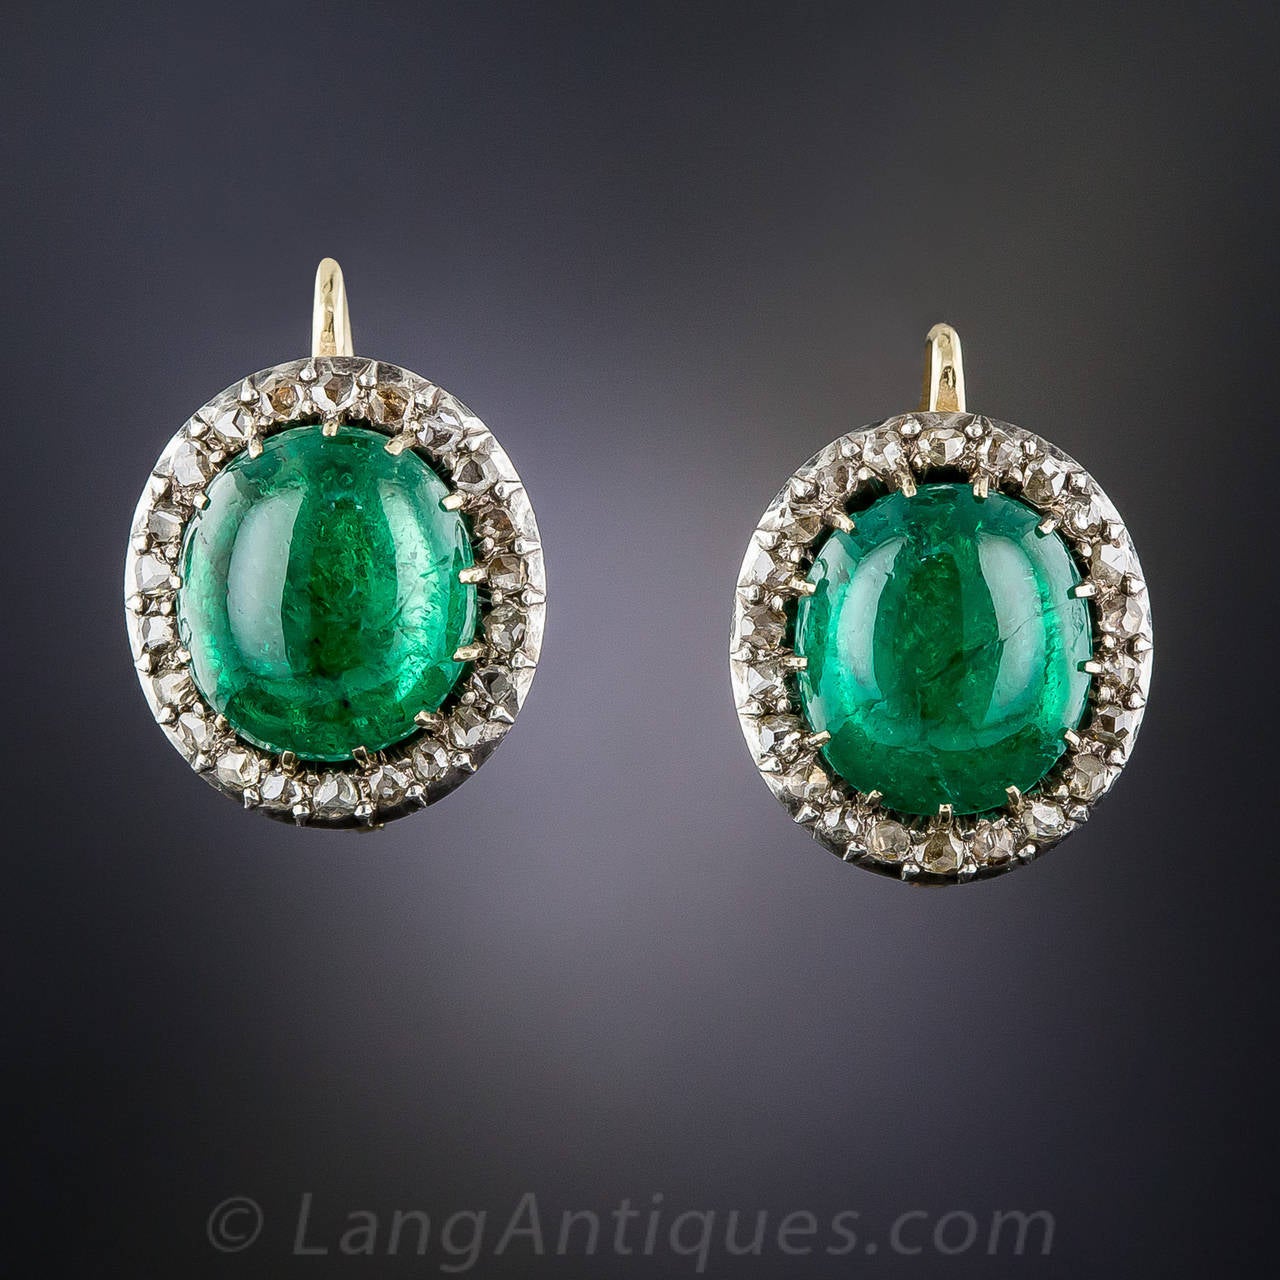 A gorgeous, delectable pair of deeply saturated, rich green gumdrops (aka cabochon emeralds), with a total weight of 8.00 carats, are traditionally presented in glittering rose-cut diamond halos, expertly hand fabricated in silver over gold - circa